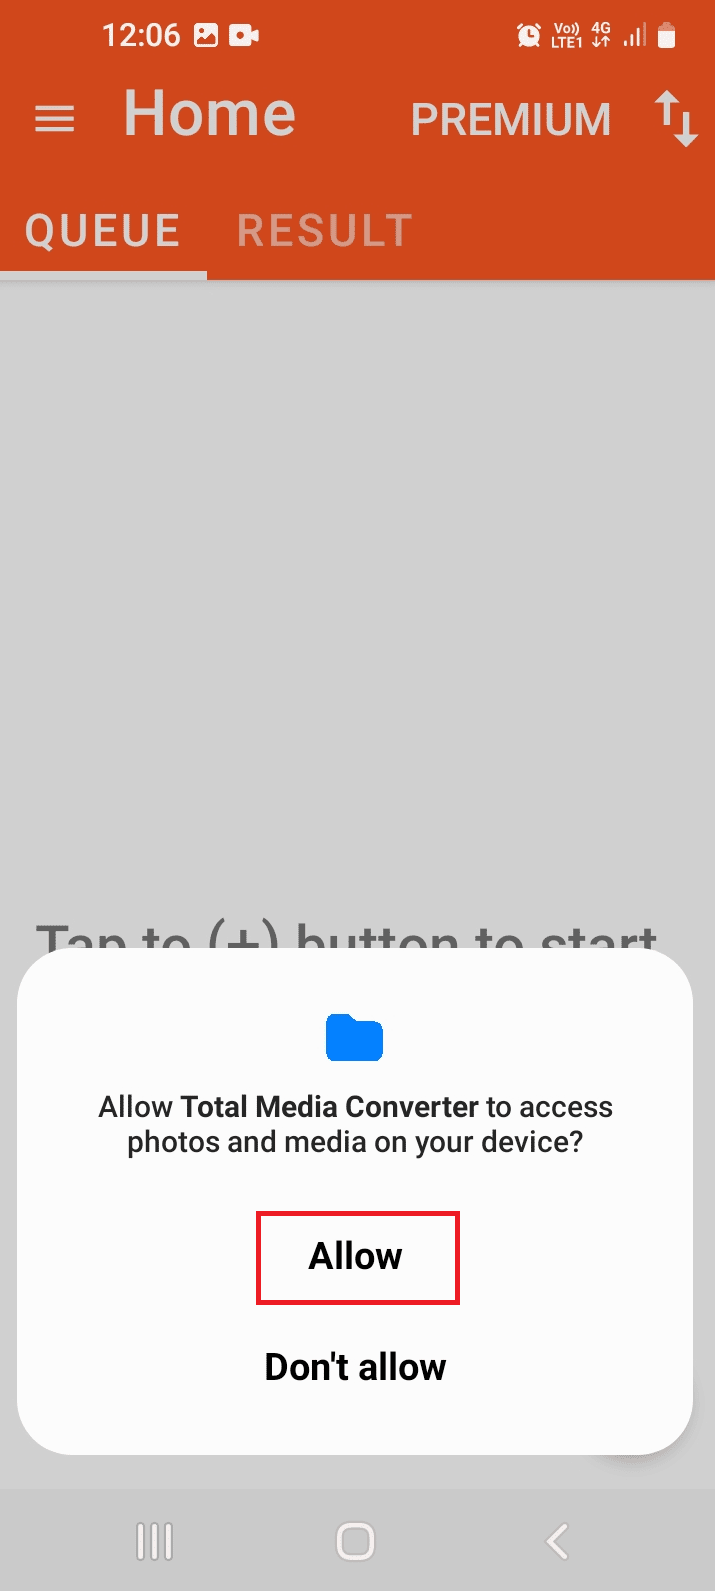 tap on the Allow option